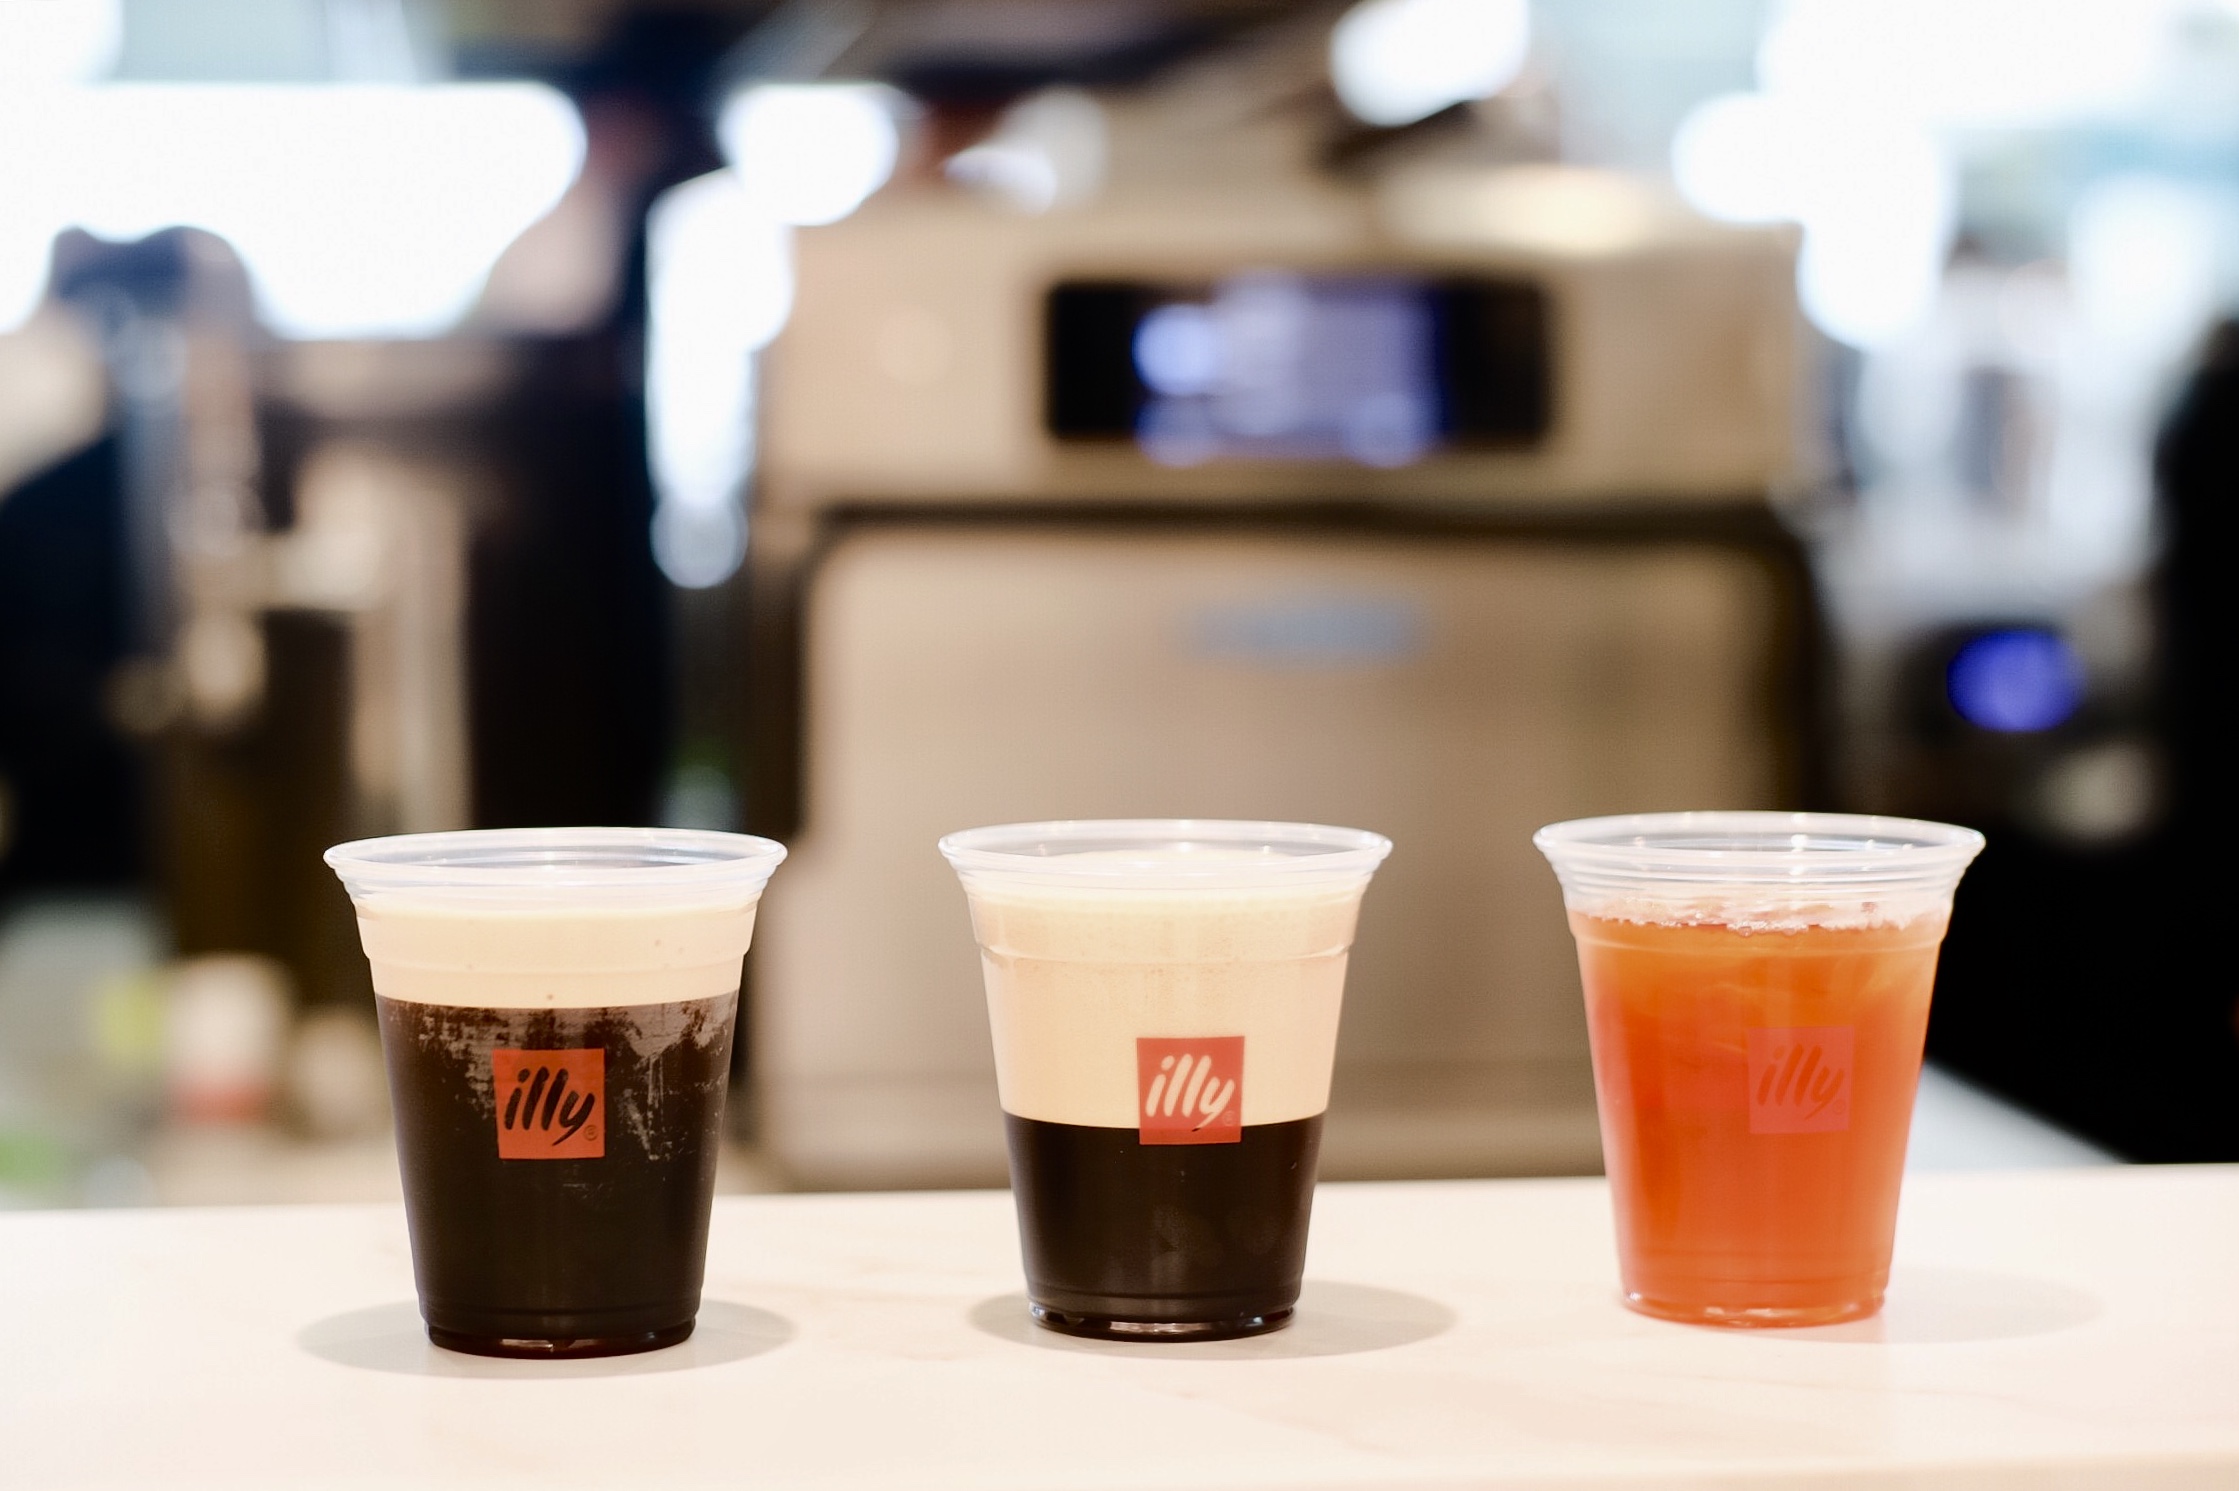 From left to right: Cold Brew Aria, Cold Brew Nitro, Iced Tea